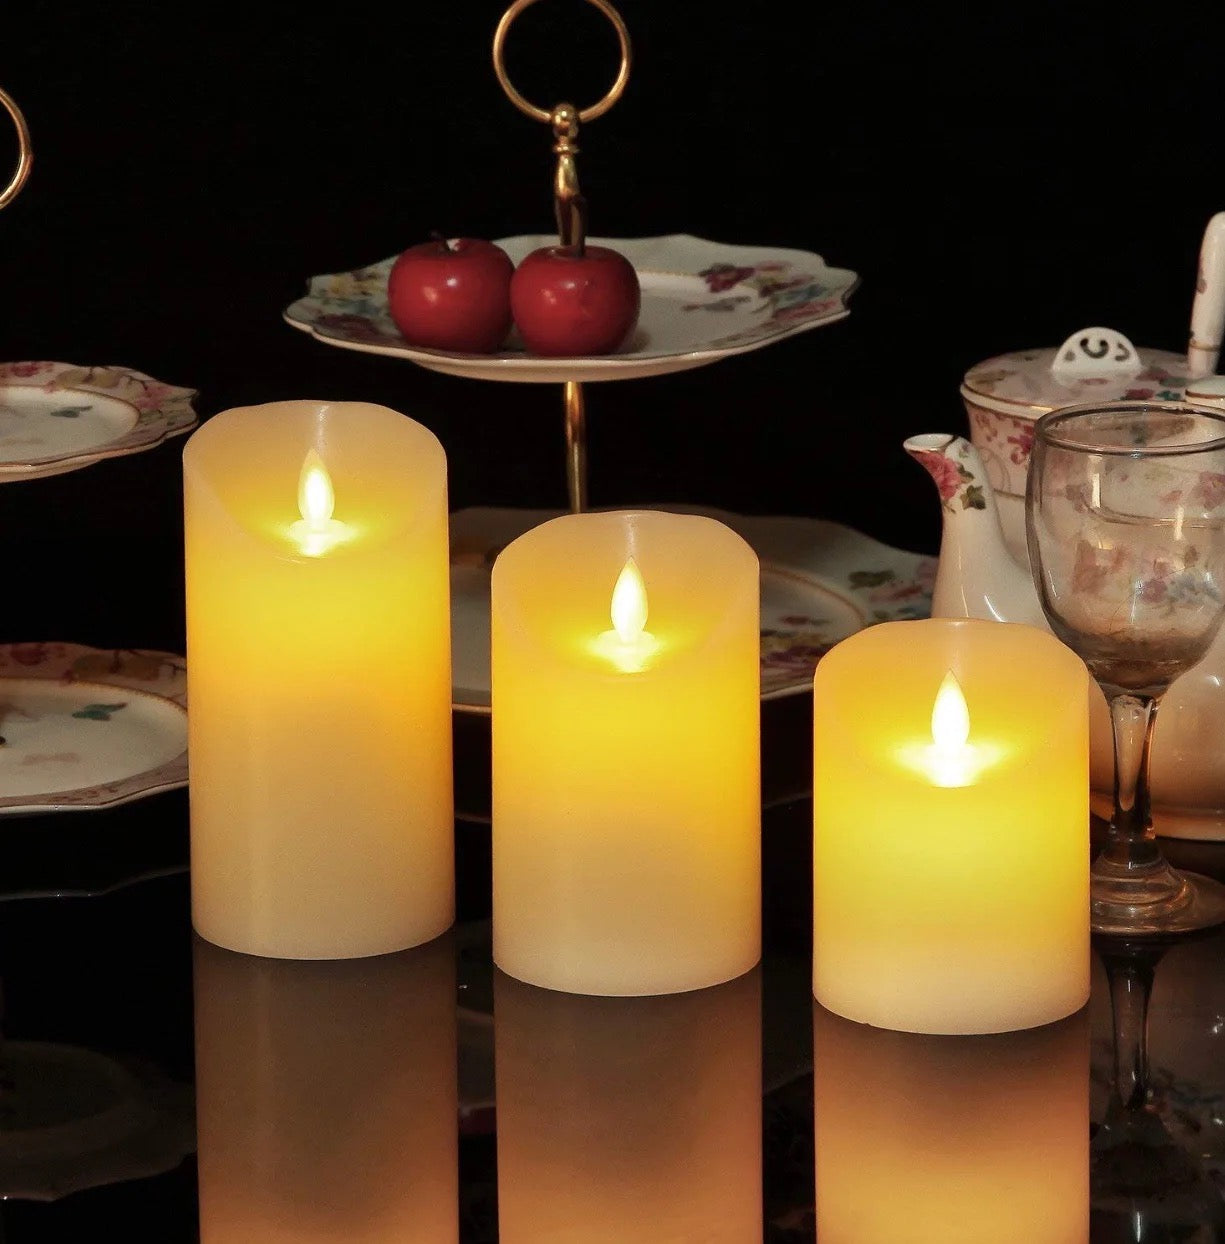 3 Flameless LED Candles in different sizes lit up and  placed on a dining table near to utensils 